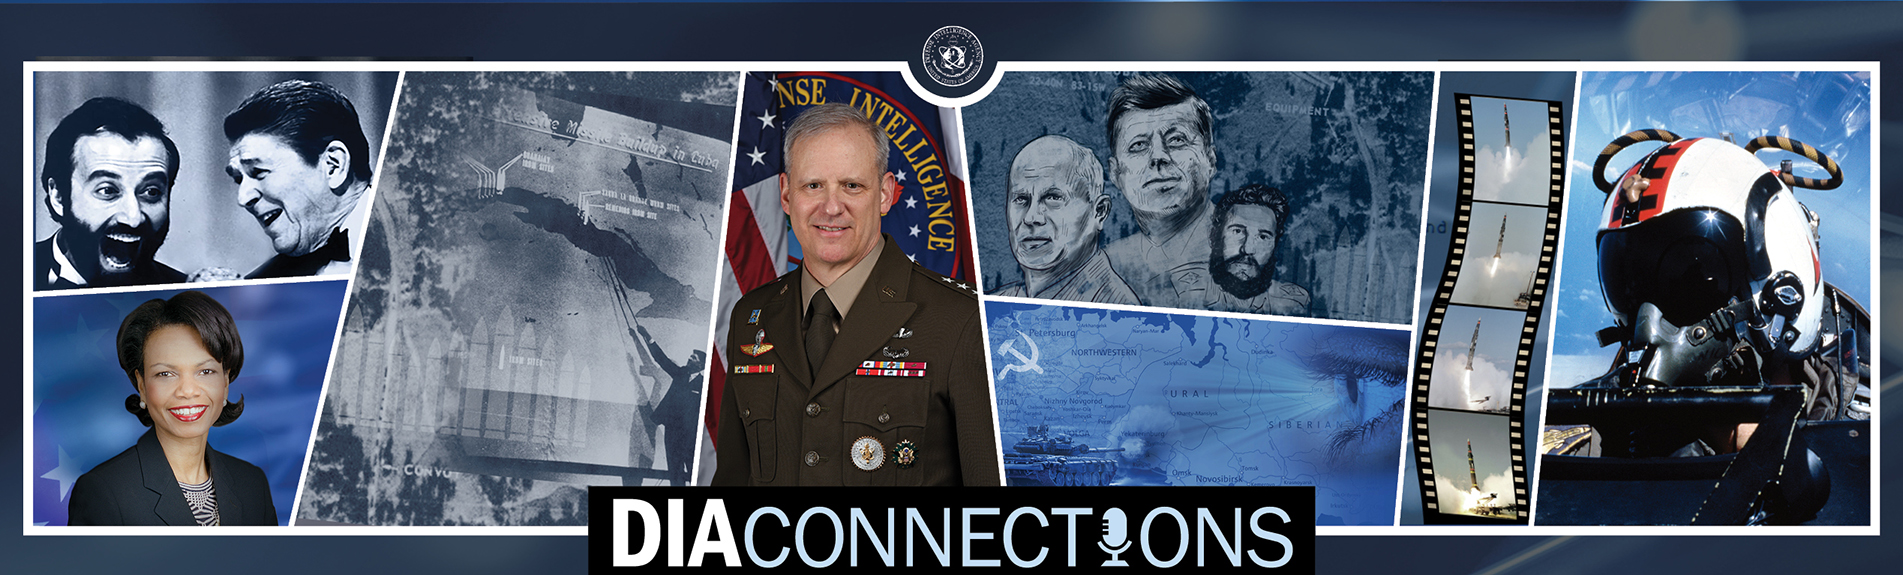 Image of a blue background with a white inner boarder surrounding a collage of images. Left to right. Two men laughing together, above an image of Condoleezza Rice. An image of a man using a fishing pole to point out specifics on a giant map. A military uniformed man. Drawn men on top of an aerial map, above an eye looking at a tank that is shooting, with a map of Europe in the back. Photo slide reels of a rocket launching. A fighter pilot inside an aircraft. Below the collage is the title. D.I.A. Connections.